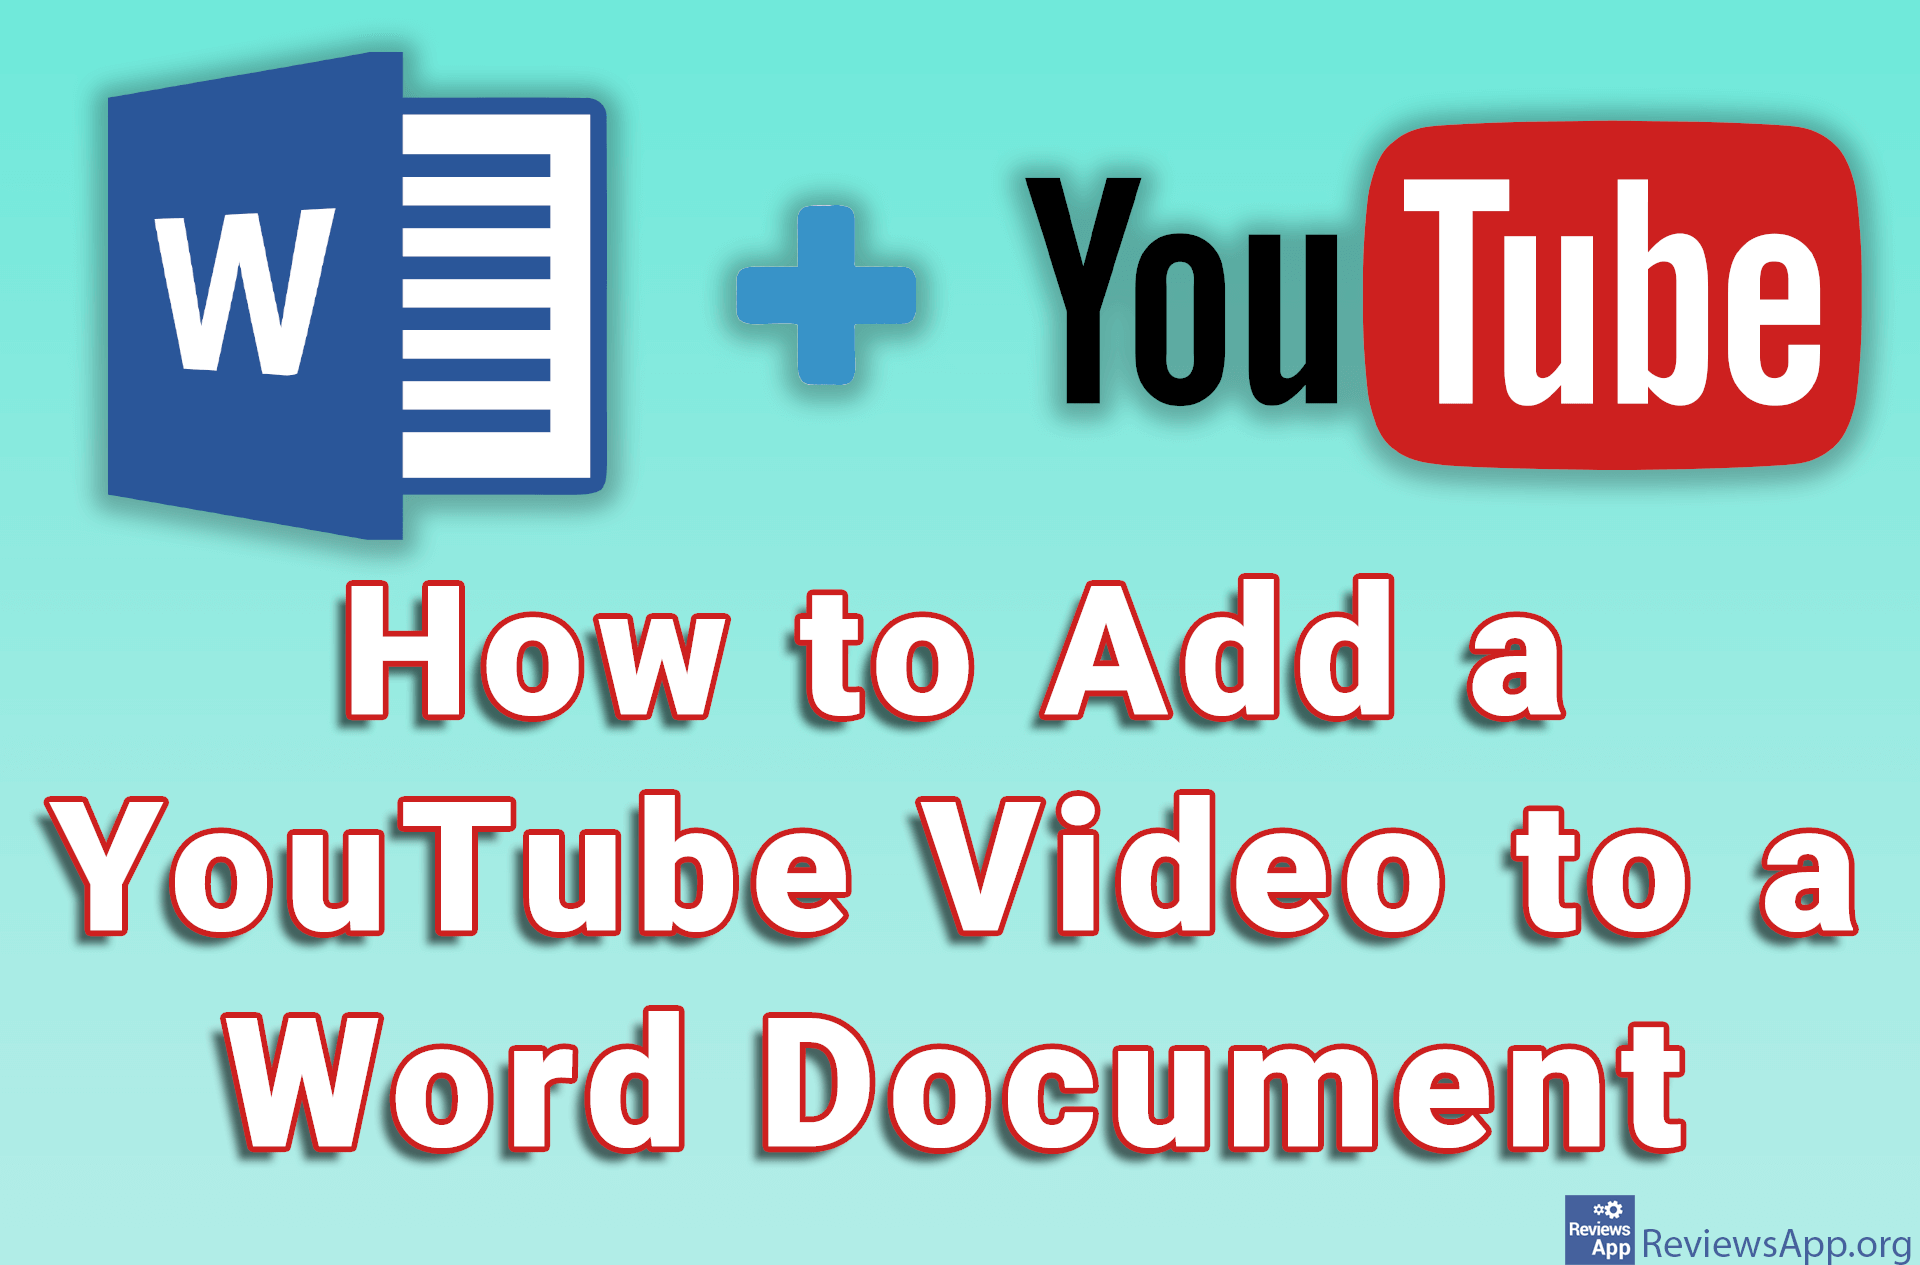 How to Add a YouTube Video to a Word Document